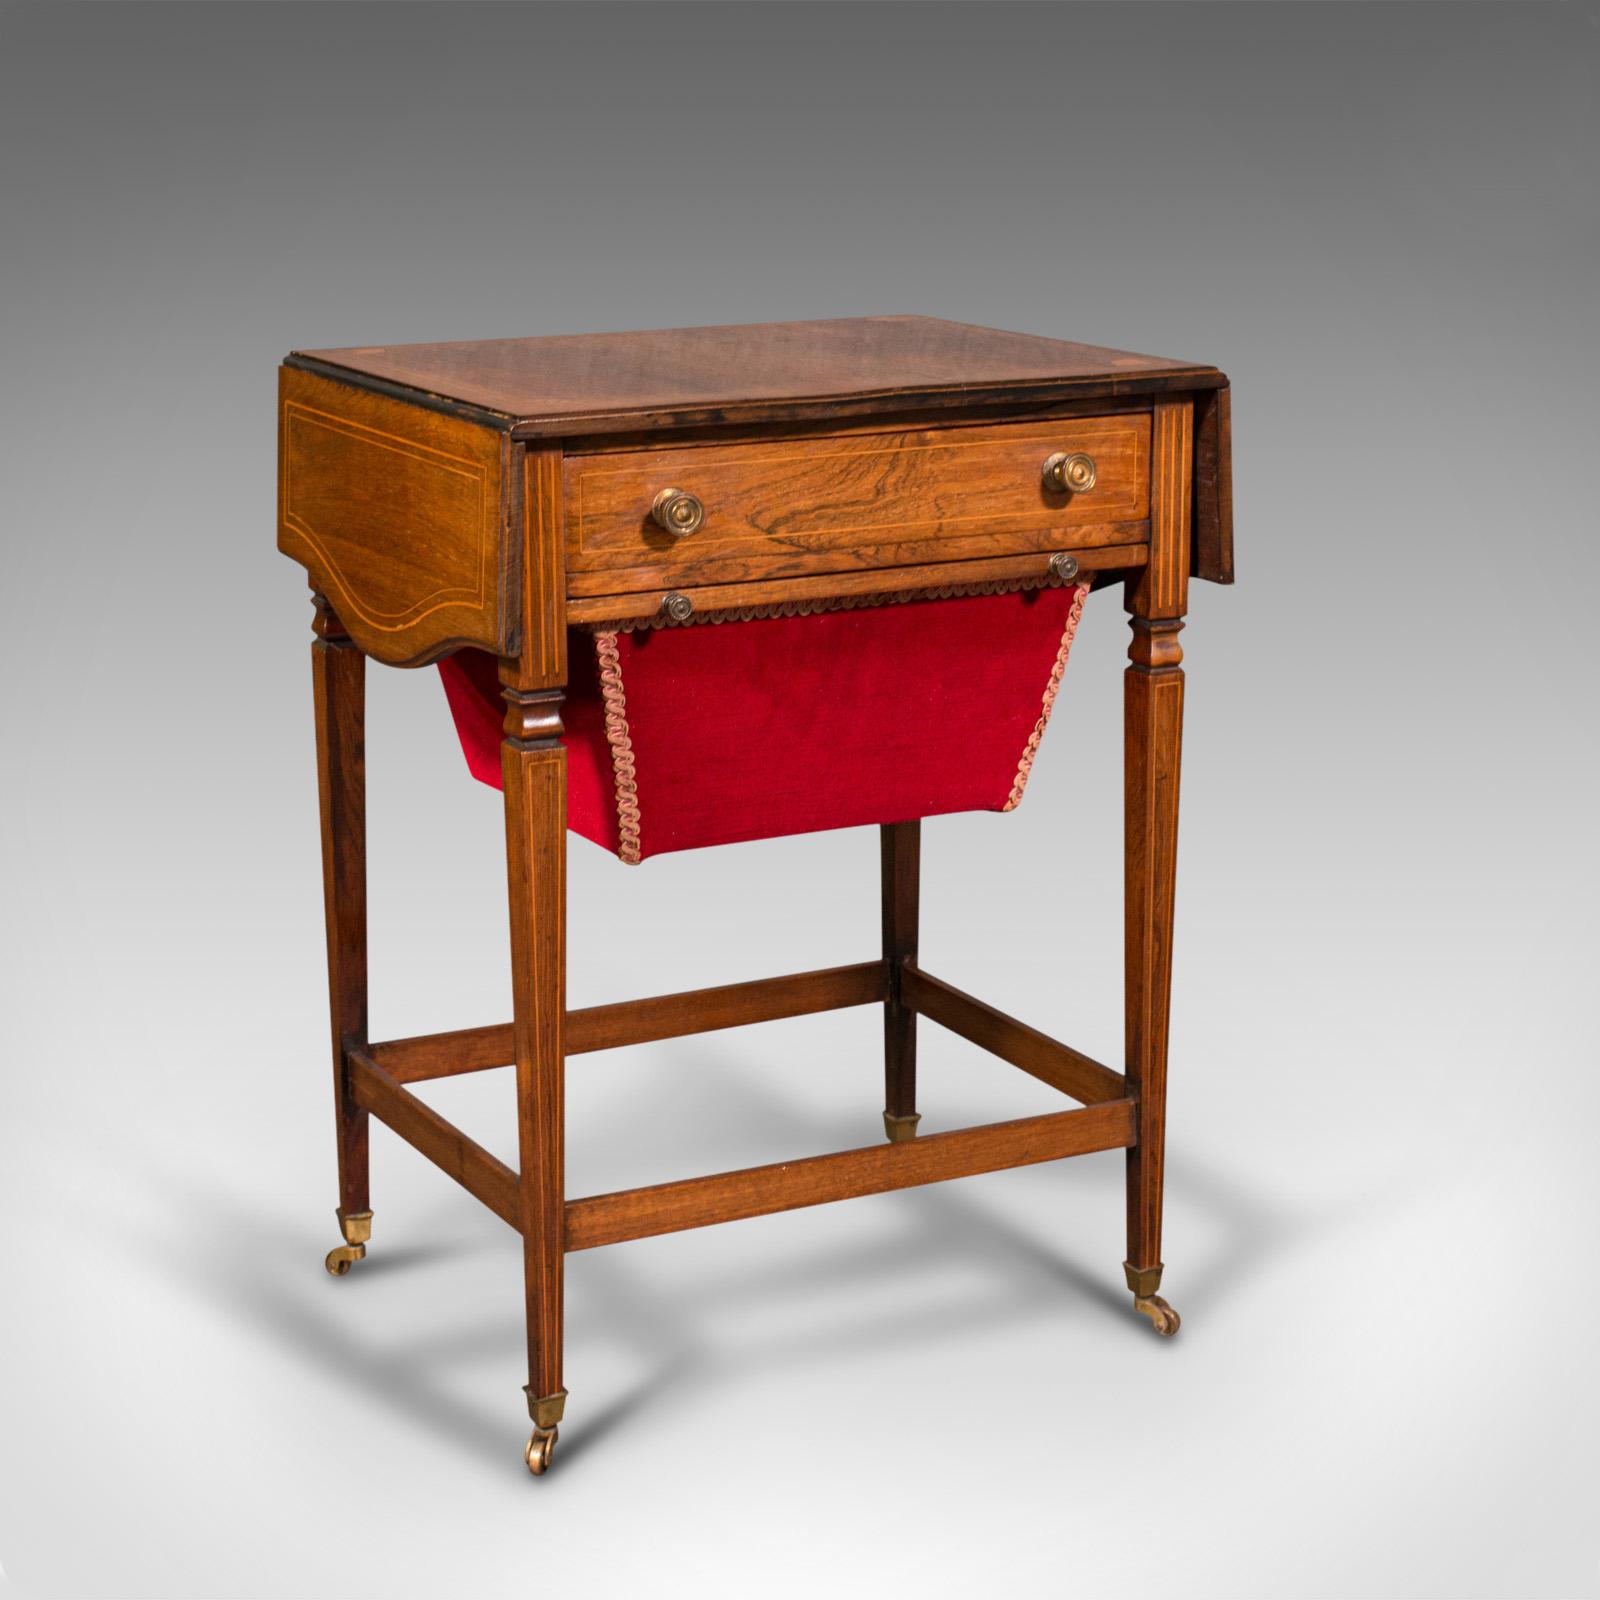 This is an antique drop leaf sewing table. An English, rosewood side or lamp table with boxwood inlay, dating to the Regency period, circa 1820.

Elegant sewing companion with wonderful late Georgian craftsmanship
Displays a desirable aged patina